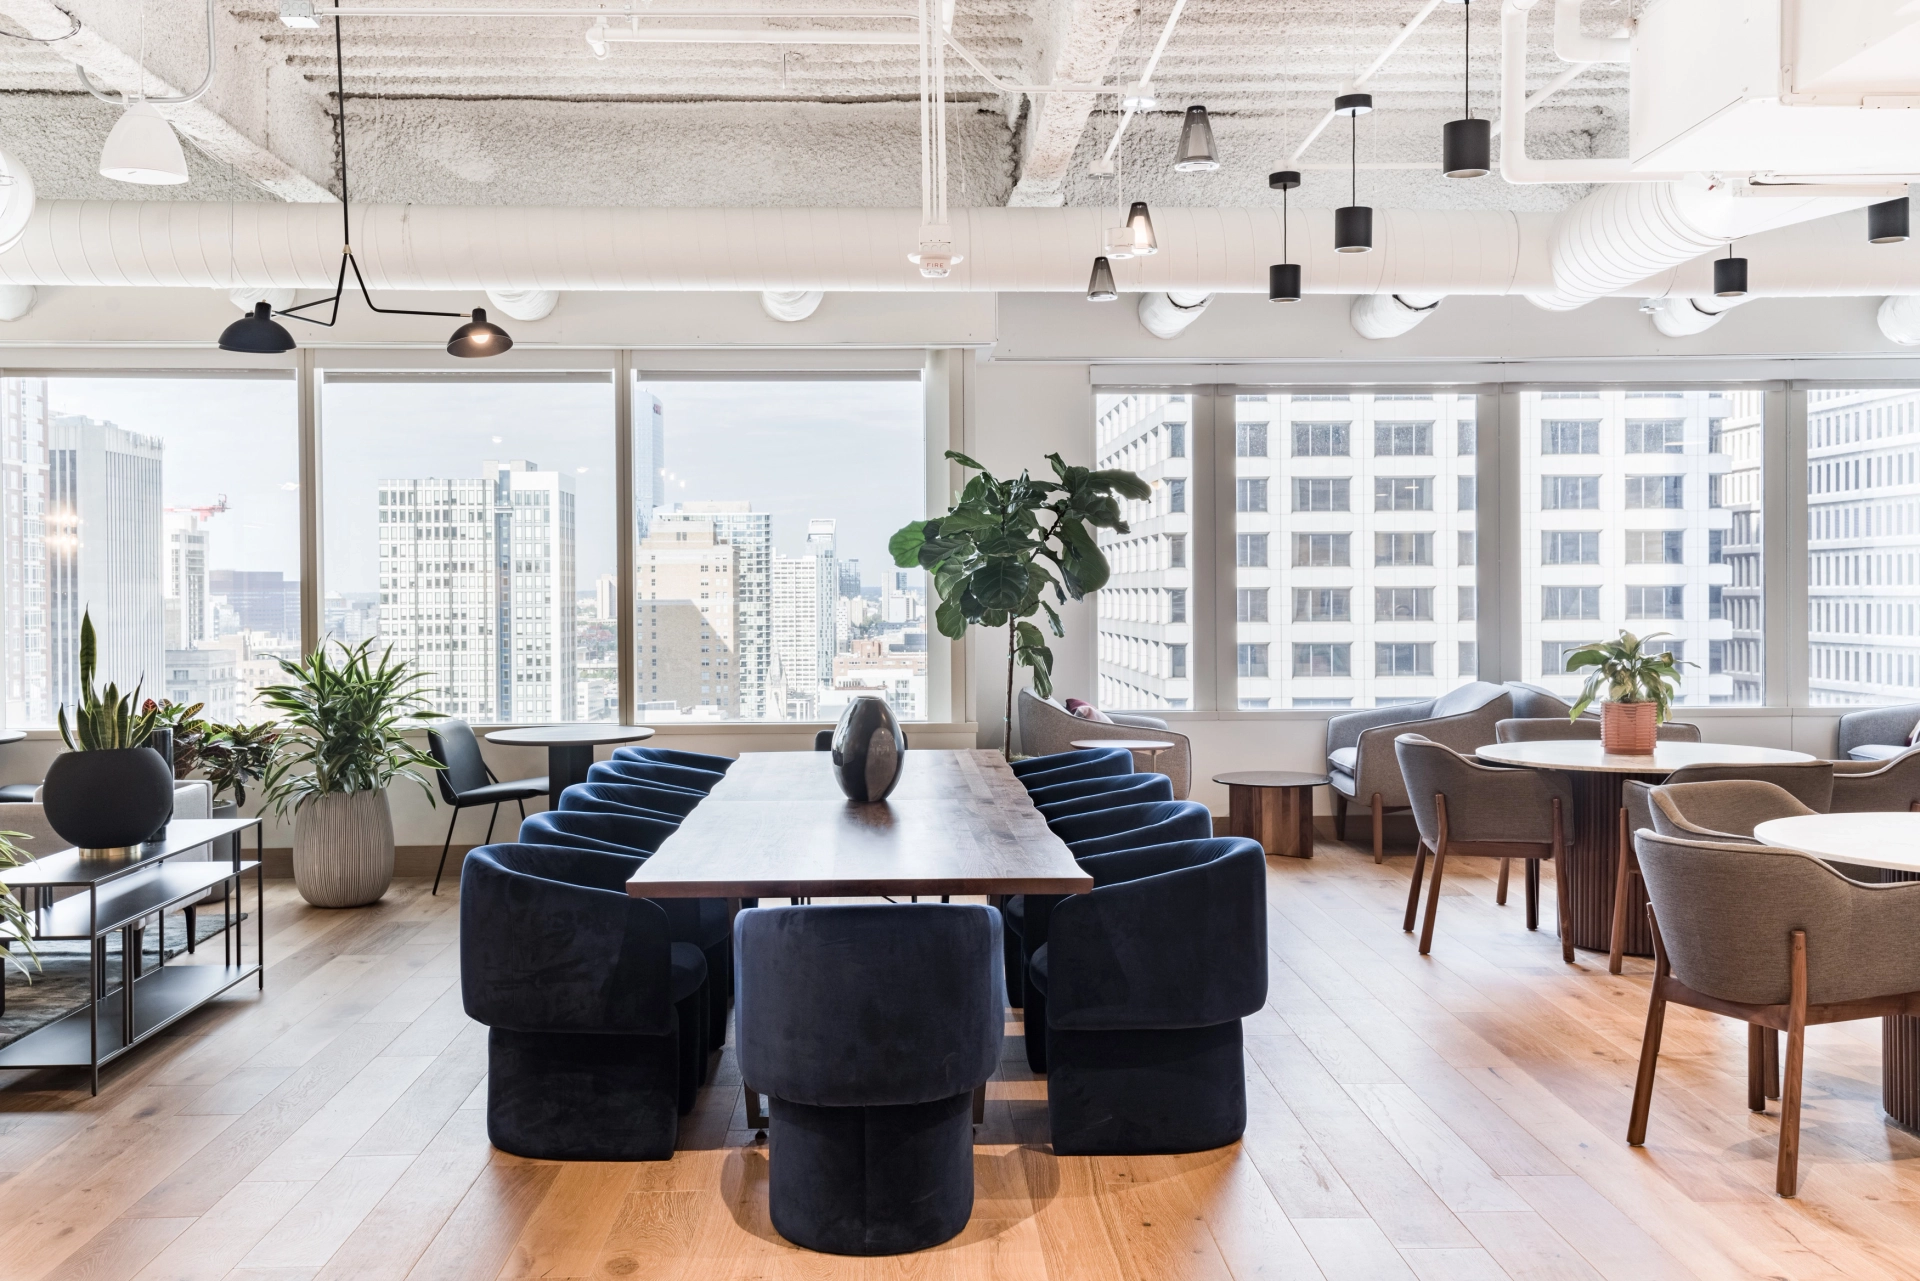 A Philadelphia office workspace with a view of the city.